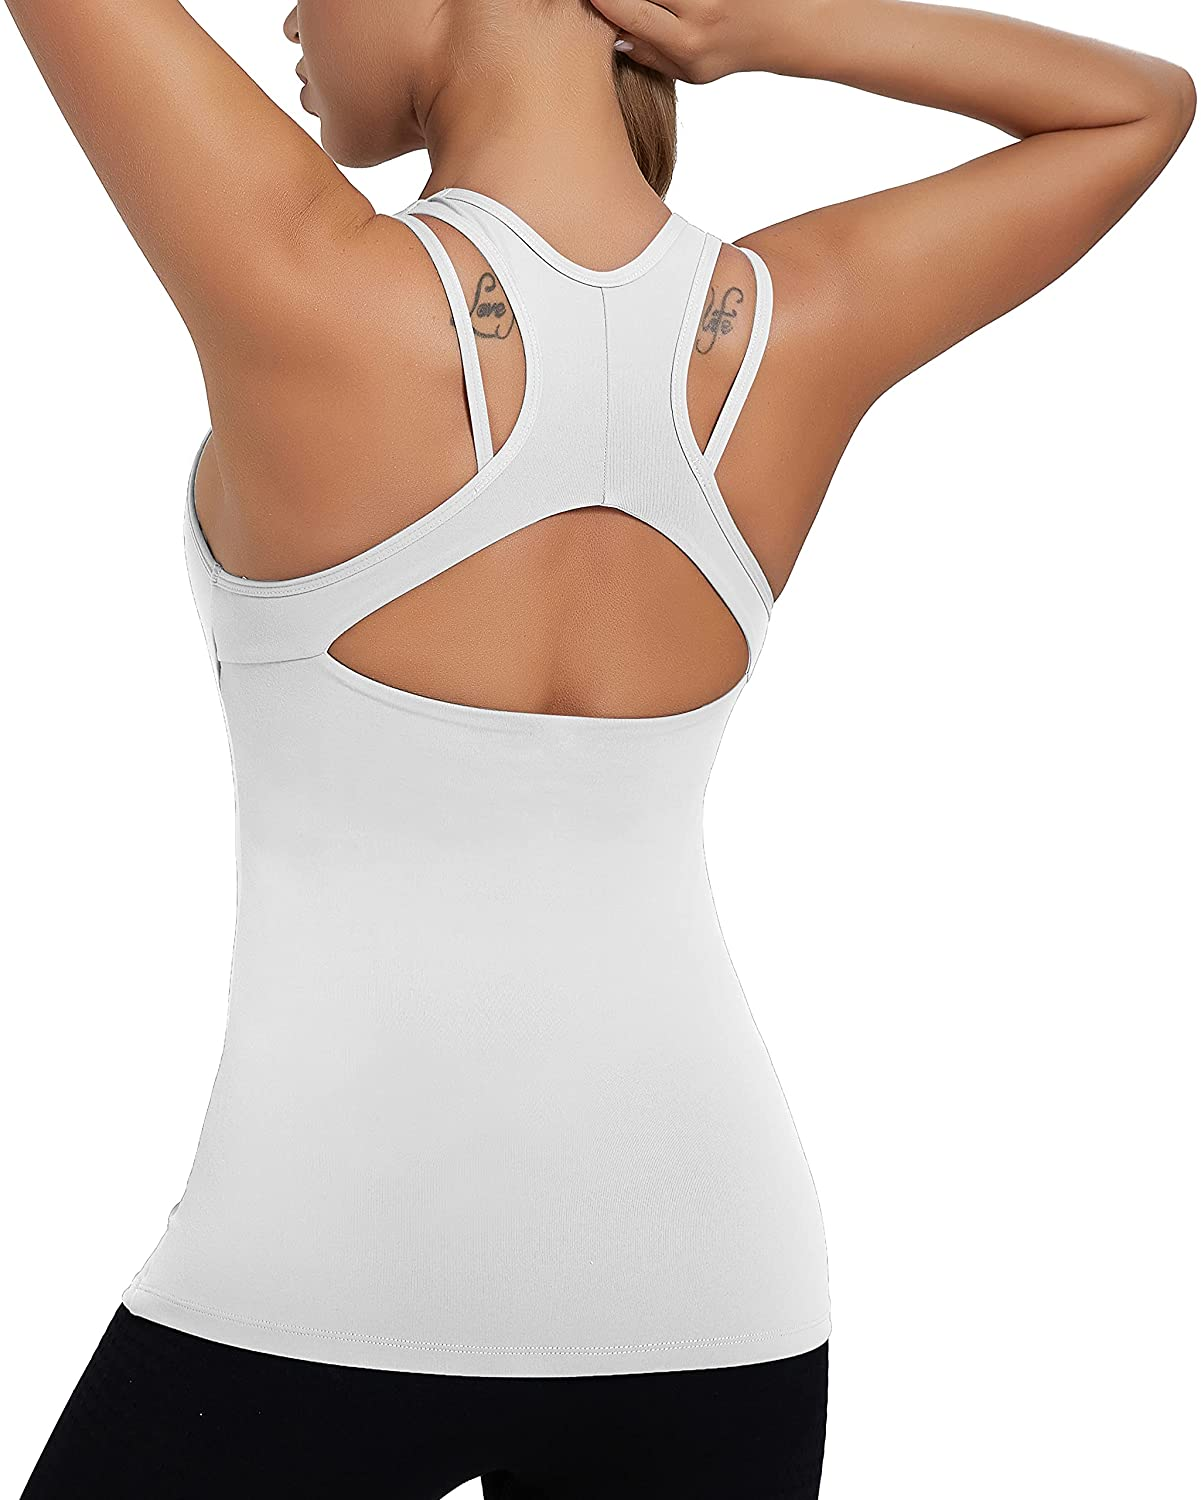 RUNNING GIRL Yoga Tank Tops Built in Bra Workout Cropped Athletic Shirts plus Si